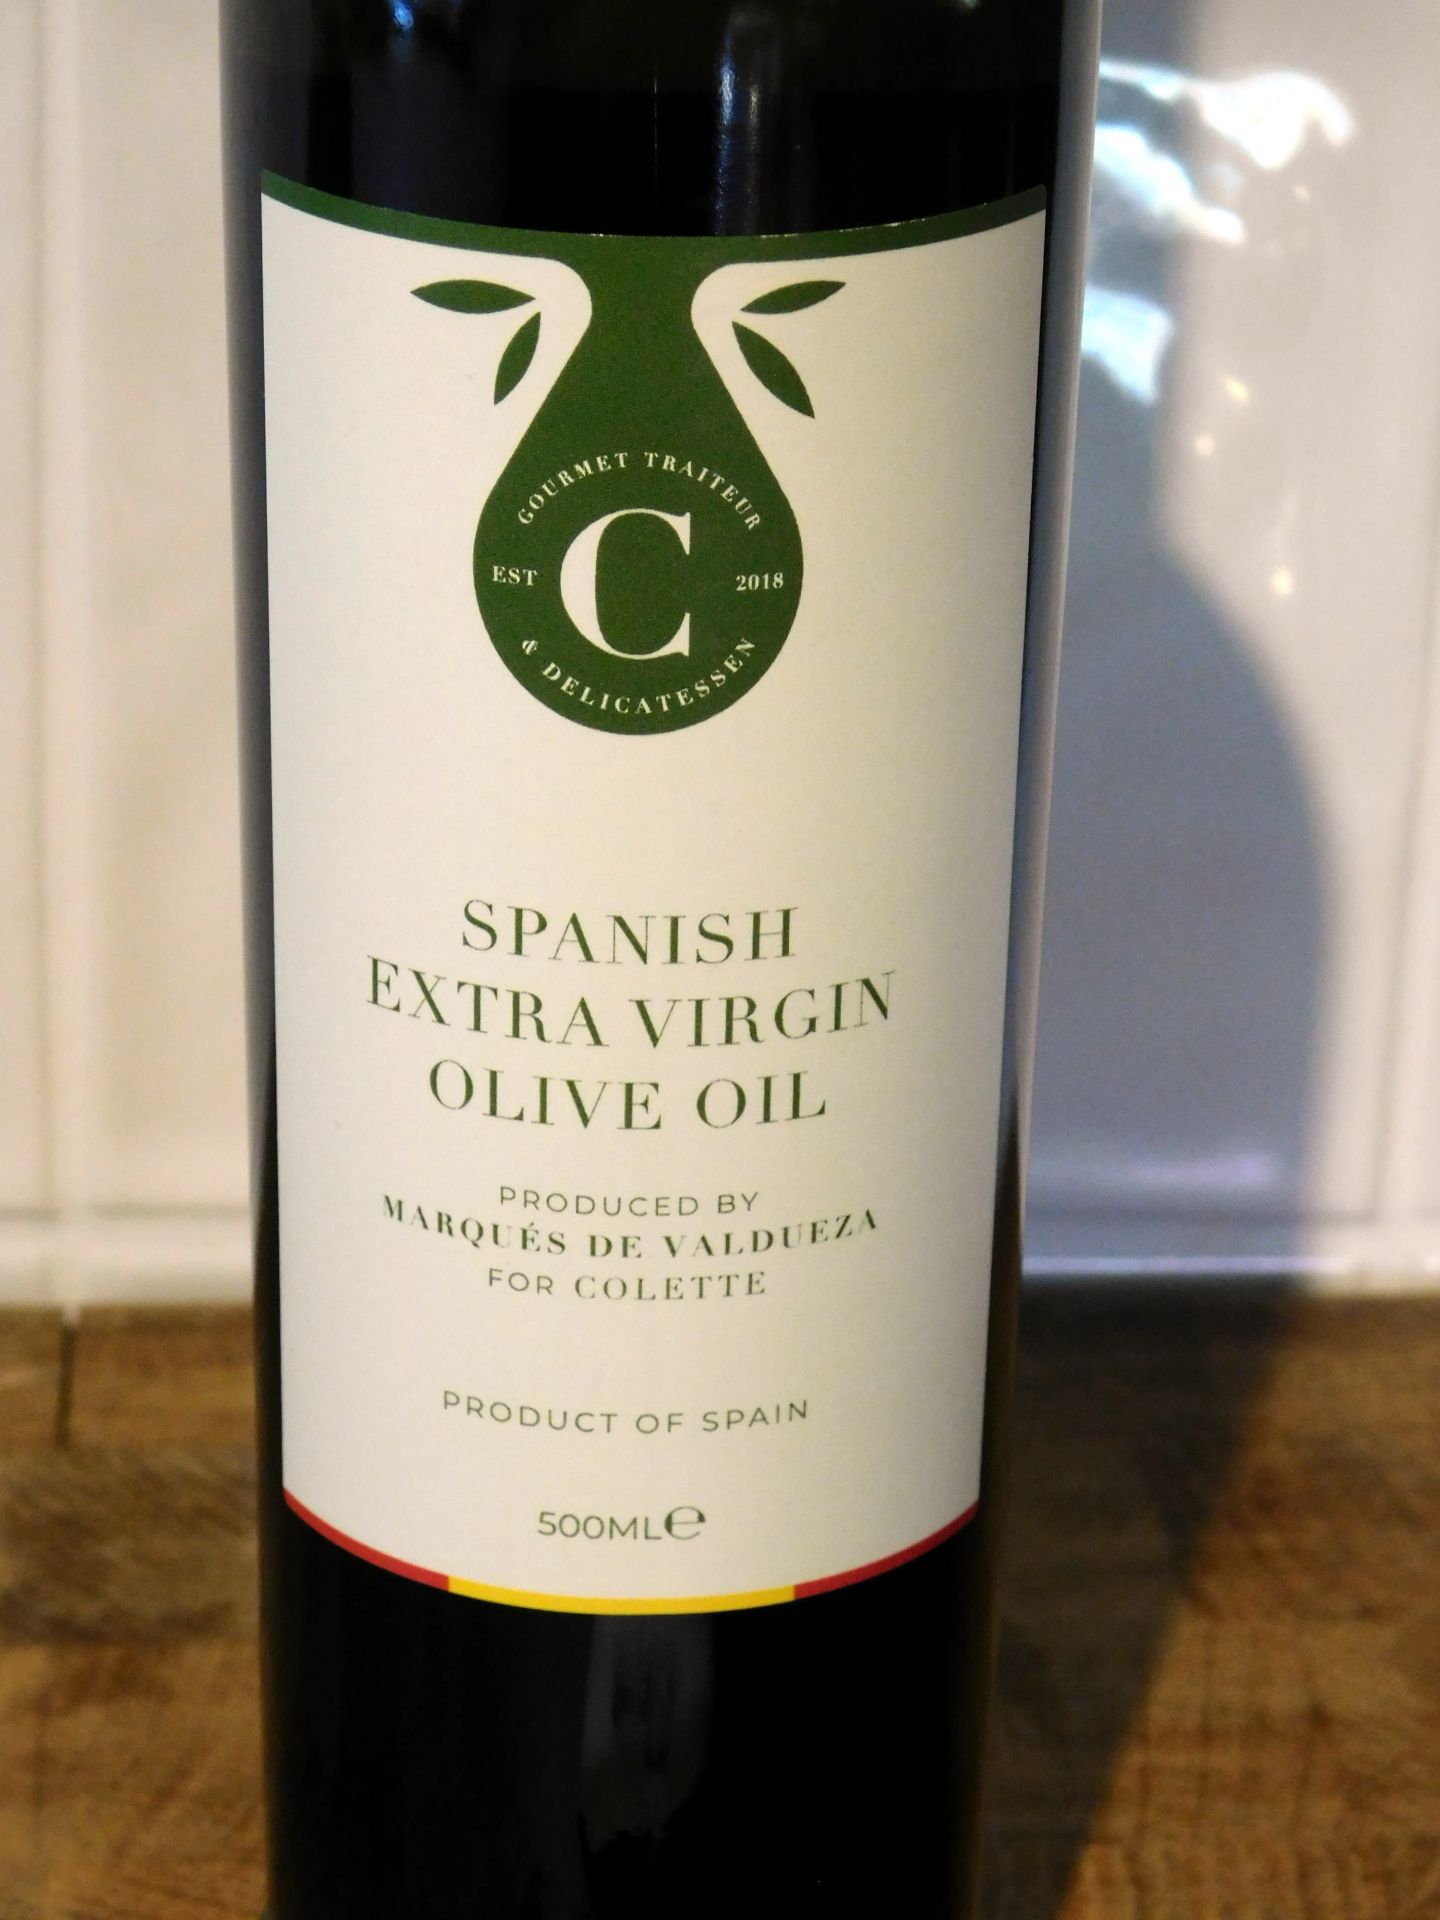 20 Colette Marques de Valdueza Spanish Extra Virgin Olive Oil, 500ml (Location: Brentwood. Please - Image 2 of 2